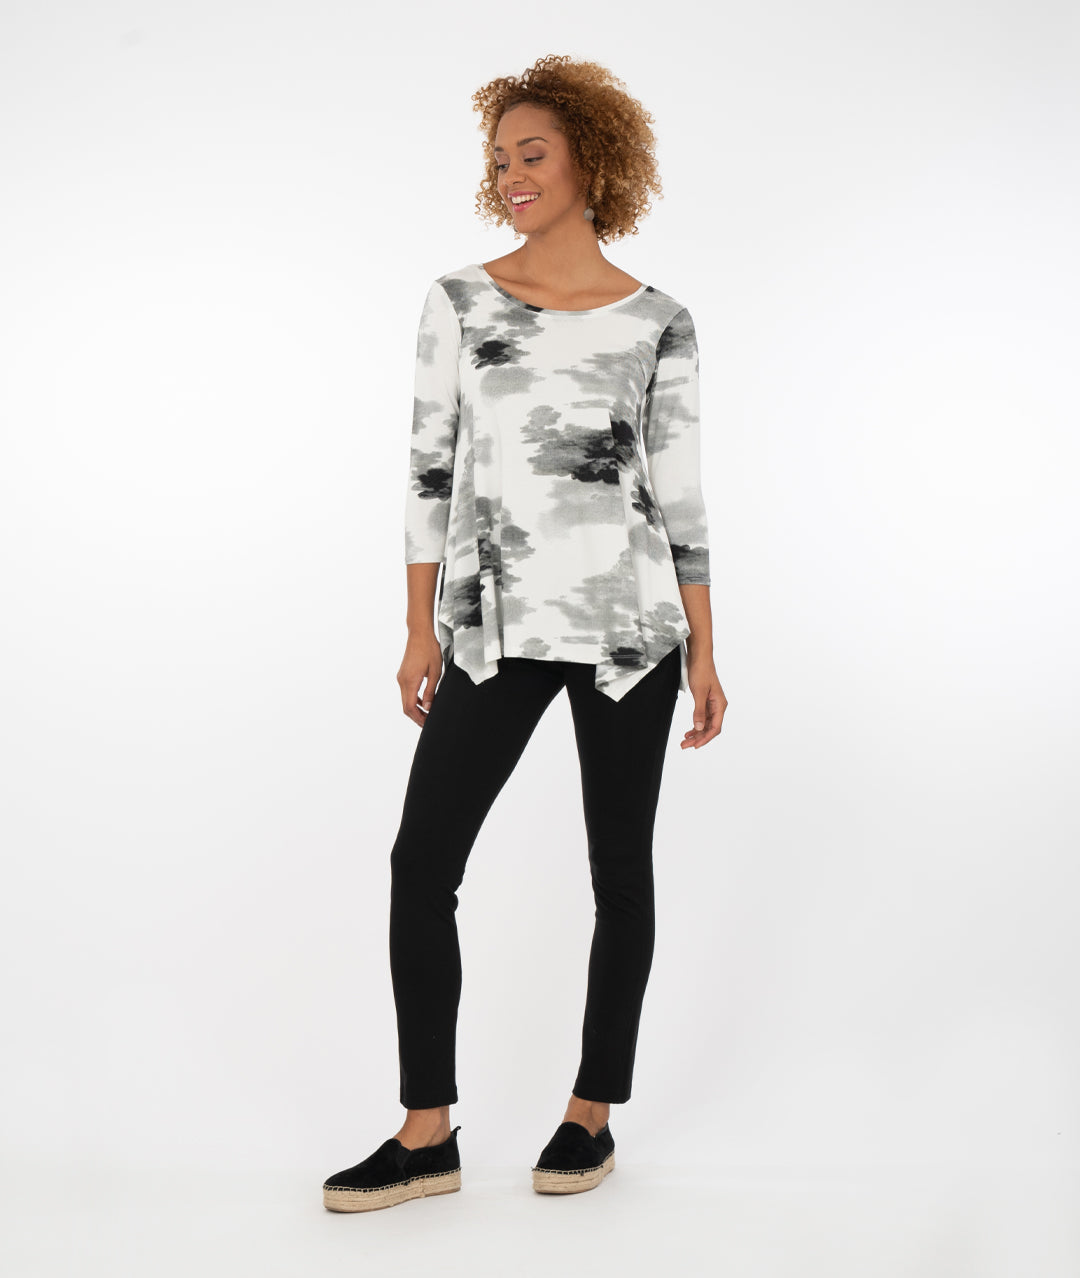 model wearing a black and white floral  top with black leggings in front of a white background